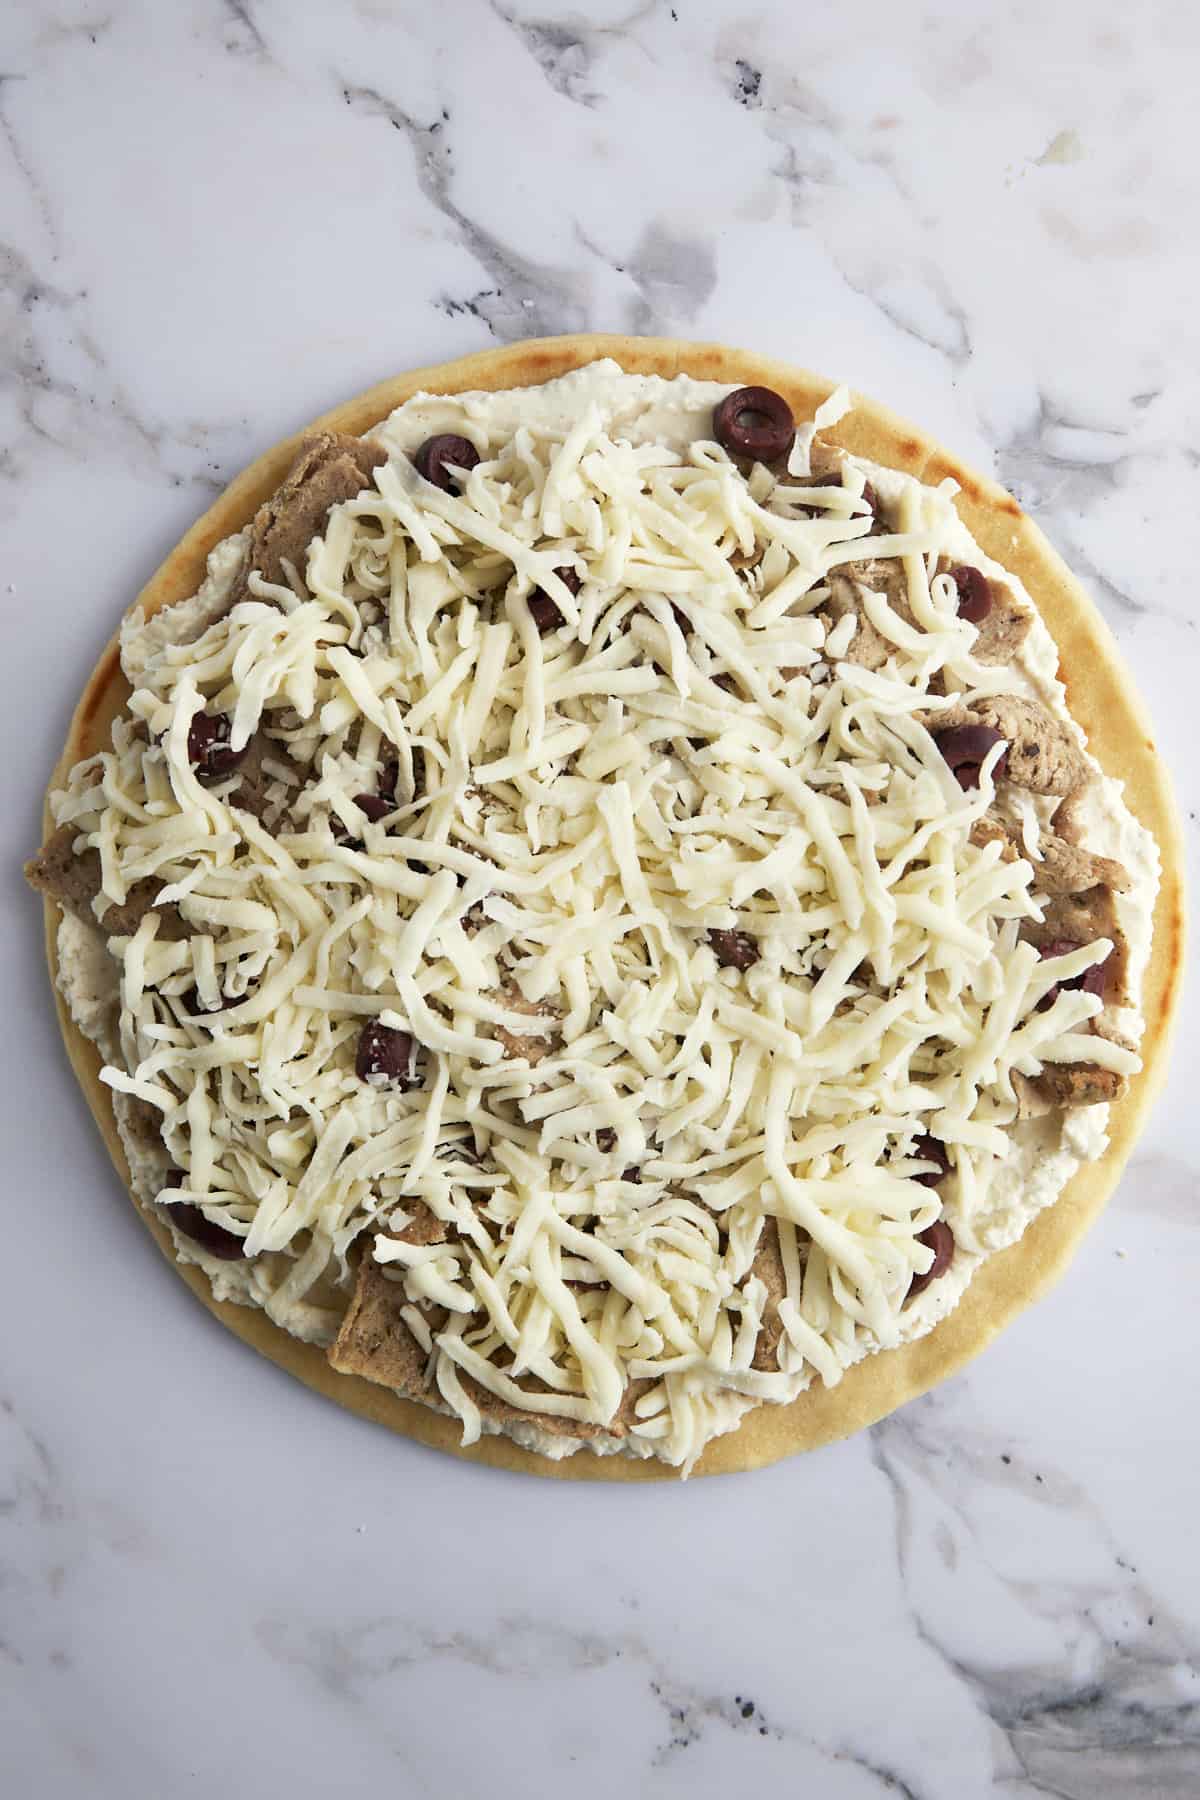 Pizza crust topped with whipped feta, gyro meat, olives, and Mozzarella cheese.